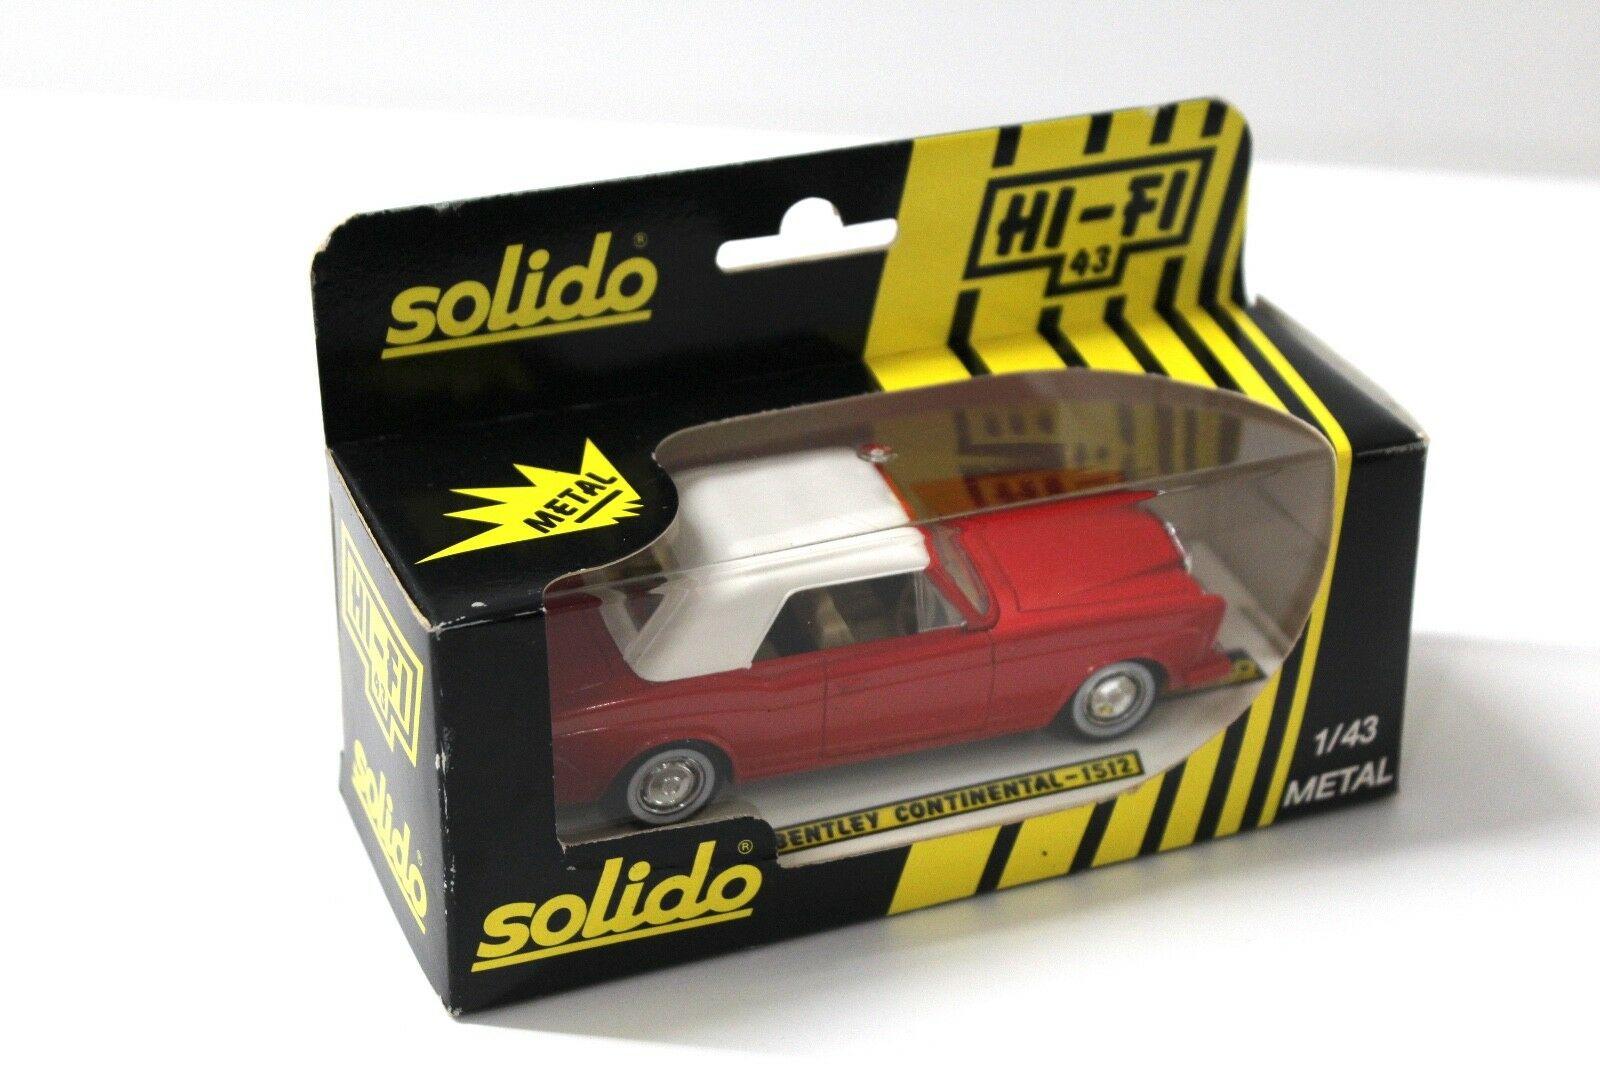 1:43 Solido Bentley Continental Cabriolet red/white